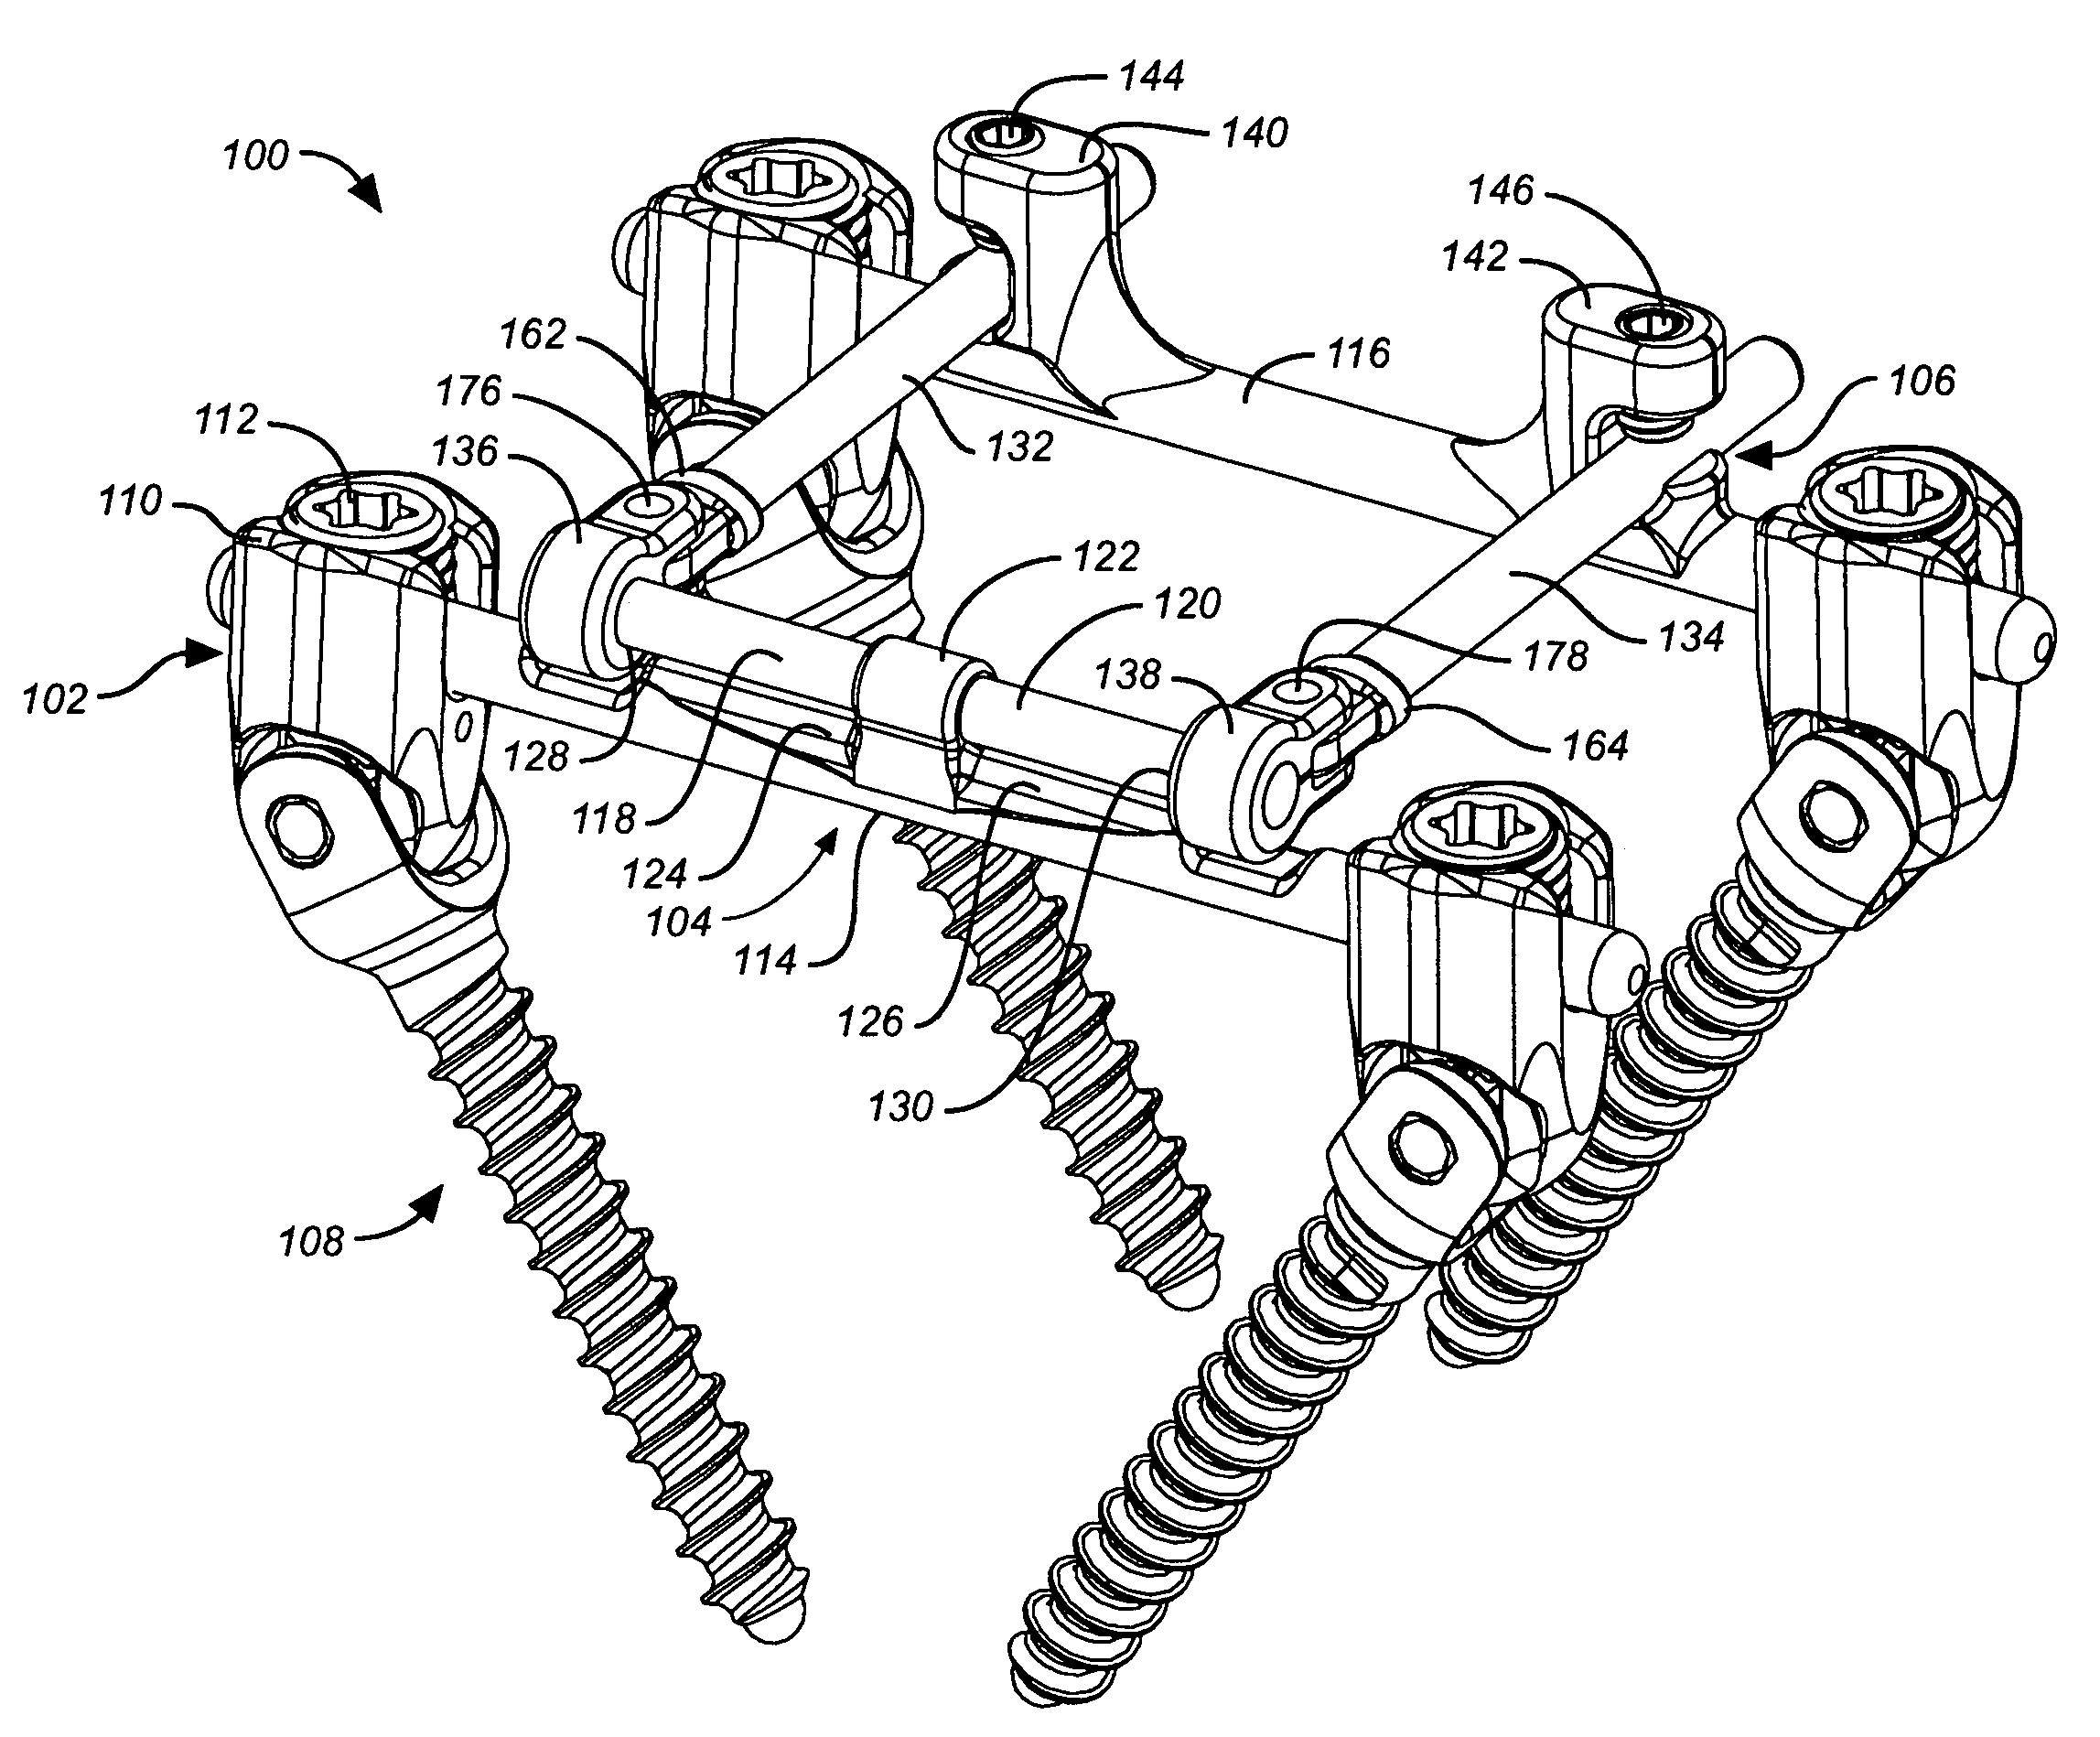 Deflection rod system for a dynamic stabilization and motion preservation spinal implantation system and method